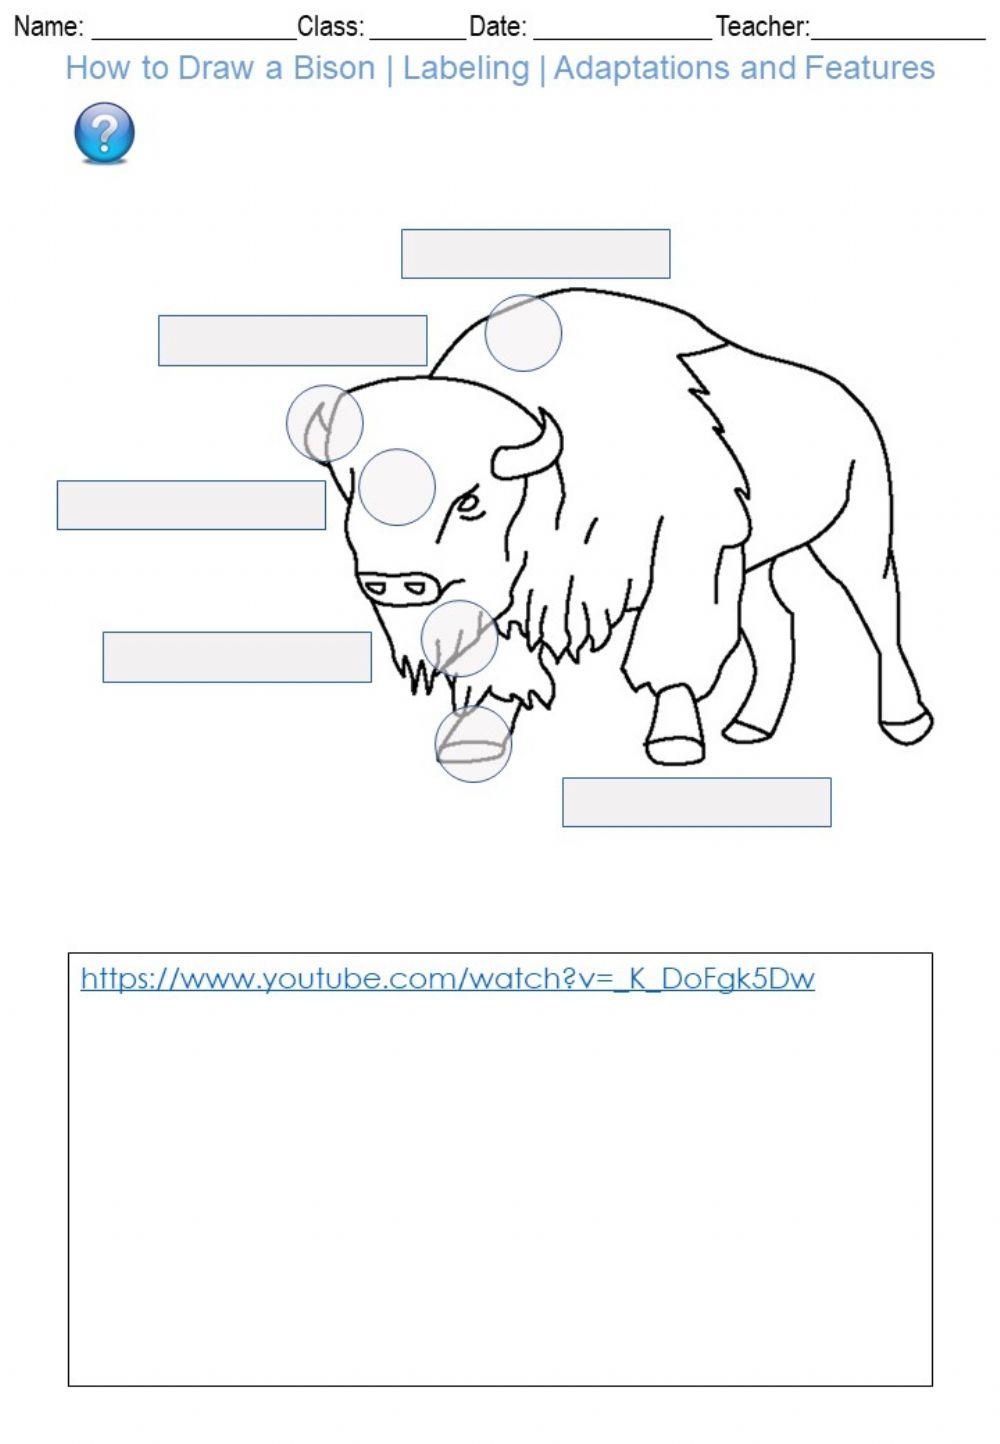 How to Draw a Bison - Labeling - Adaptations and Features